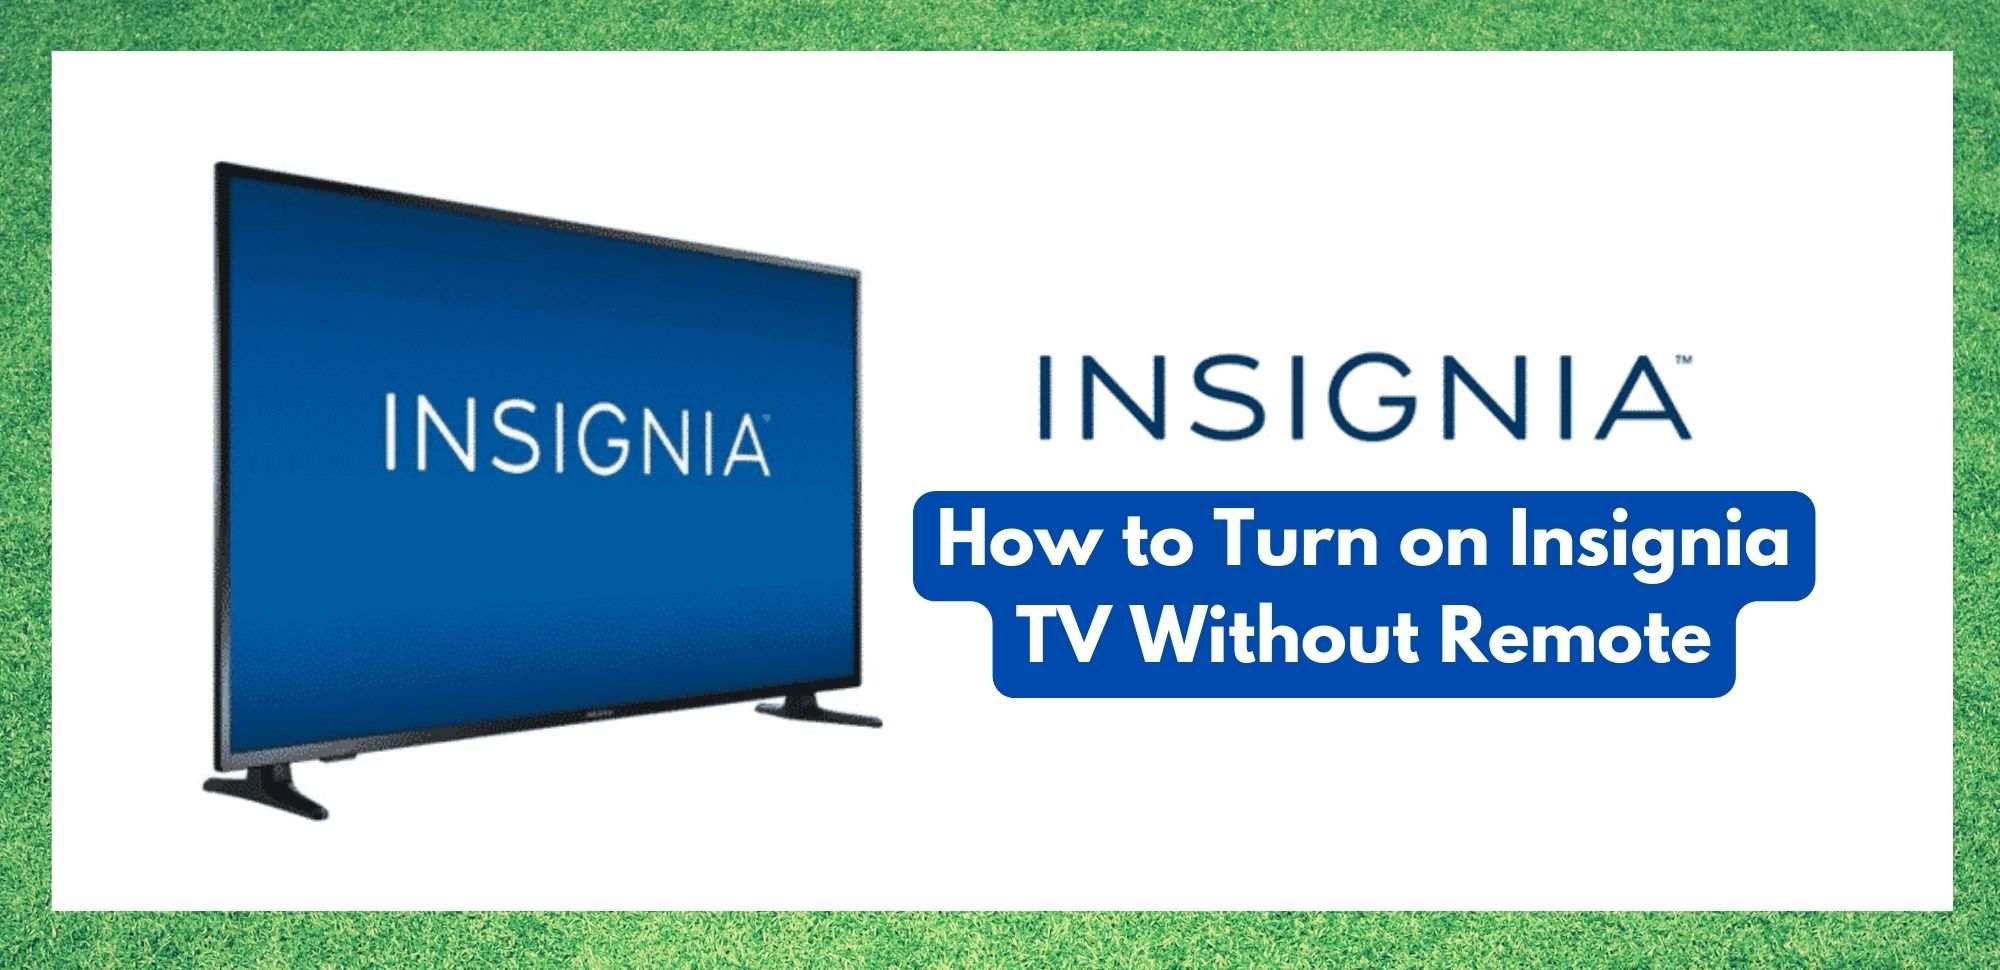 how to turn on insignia tv without remote